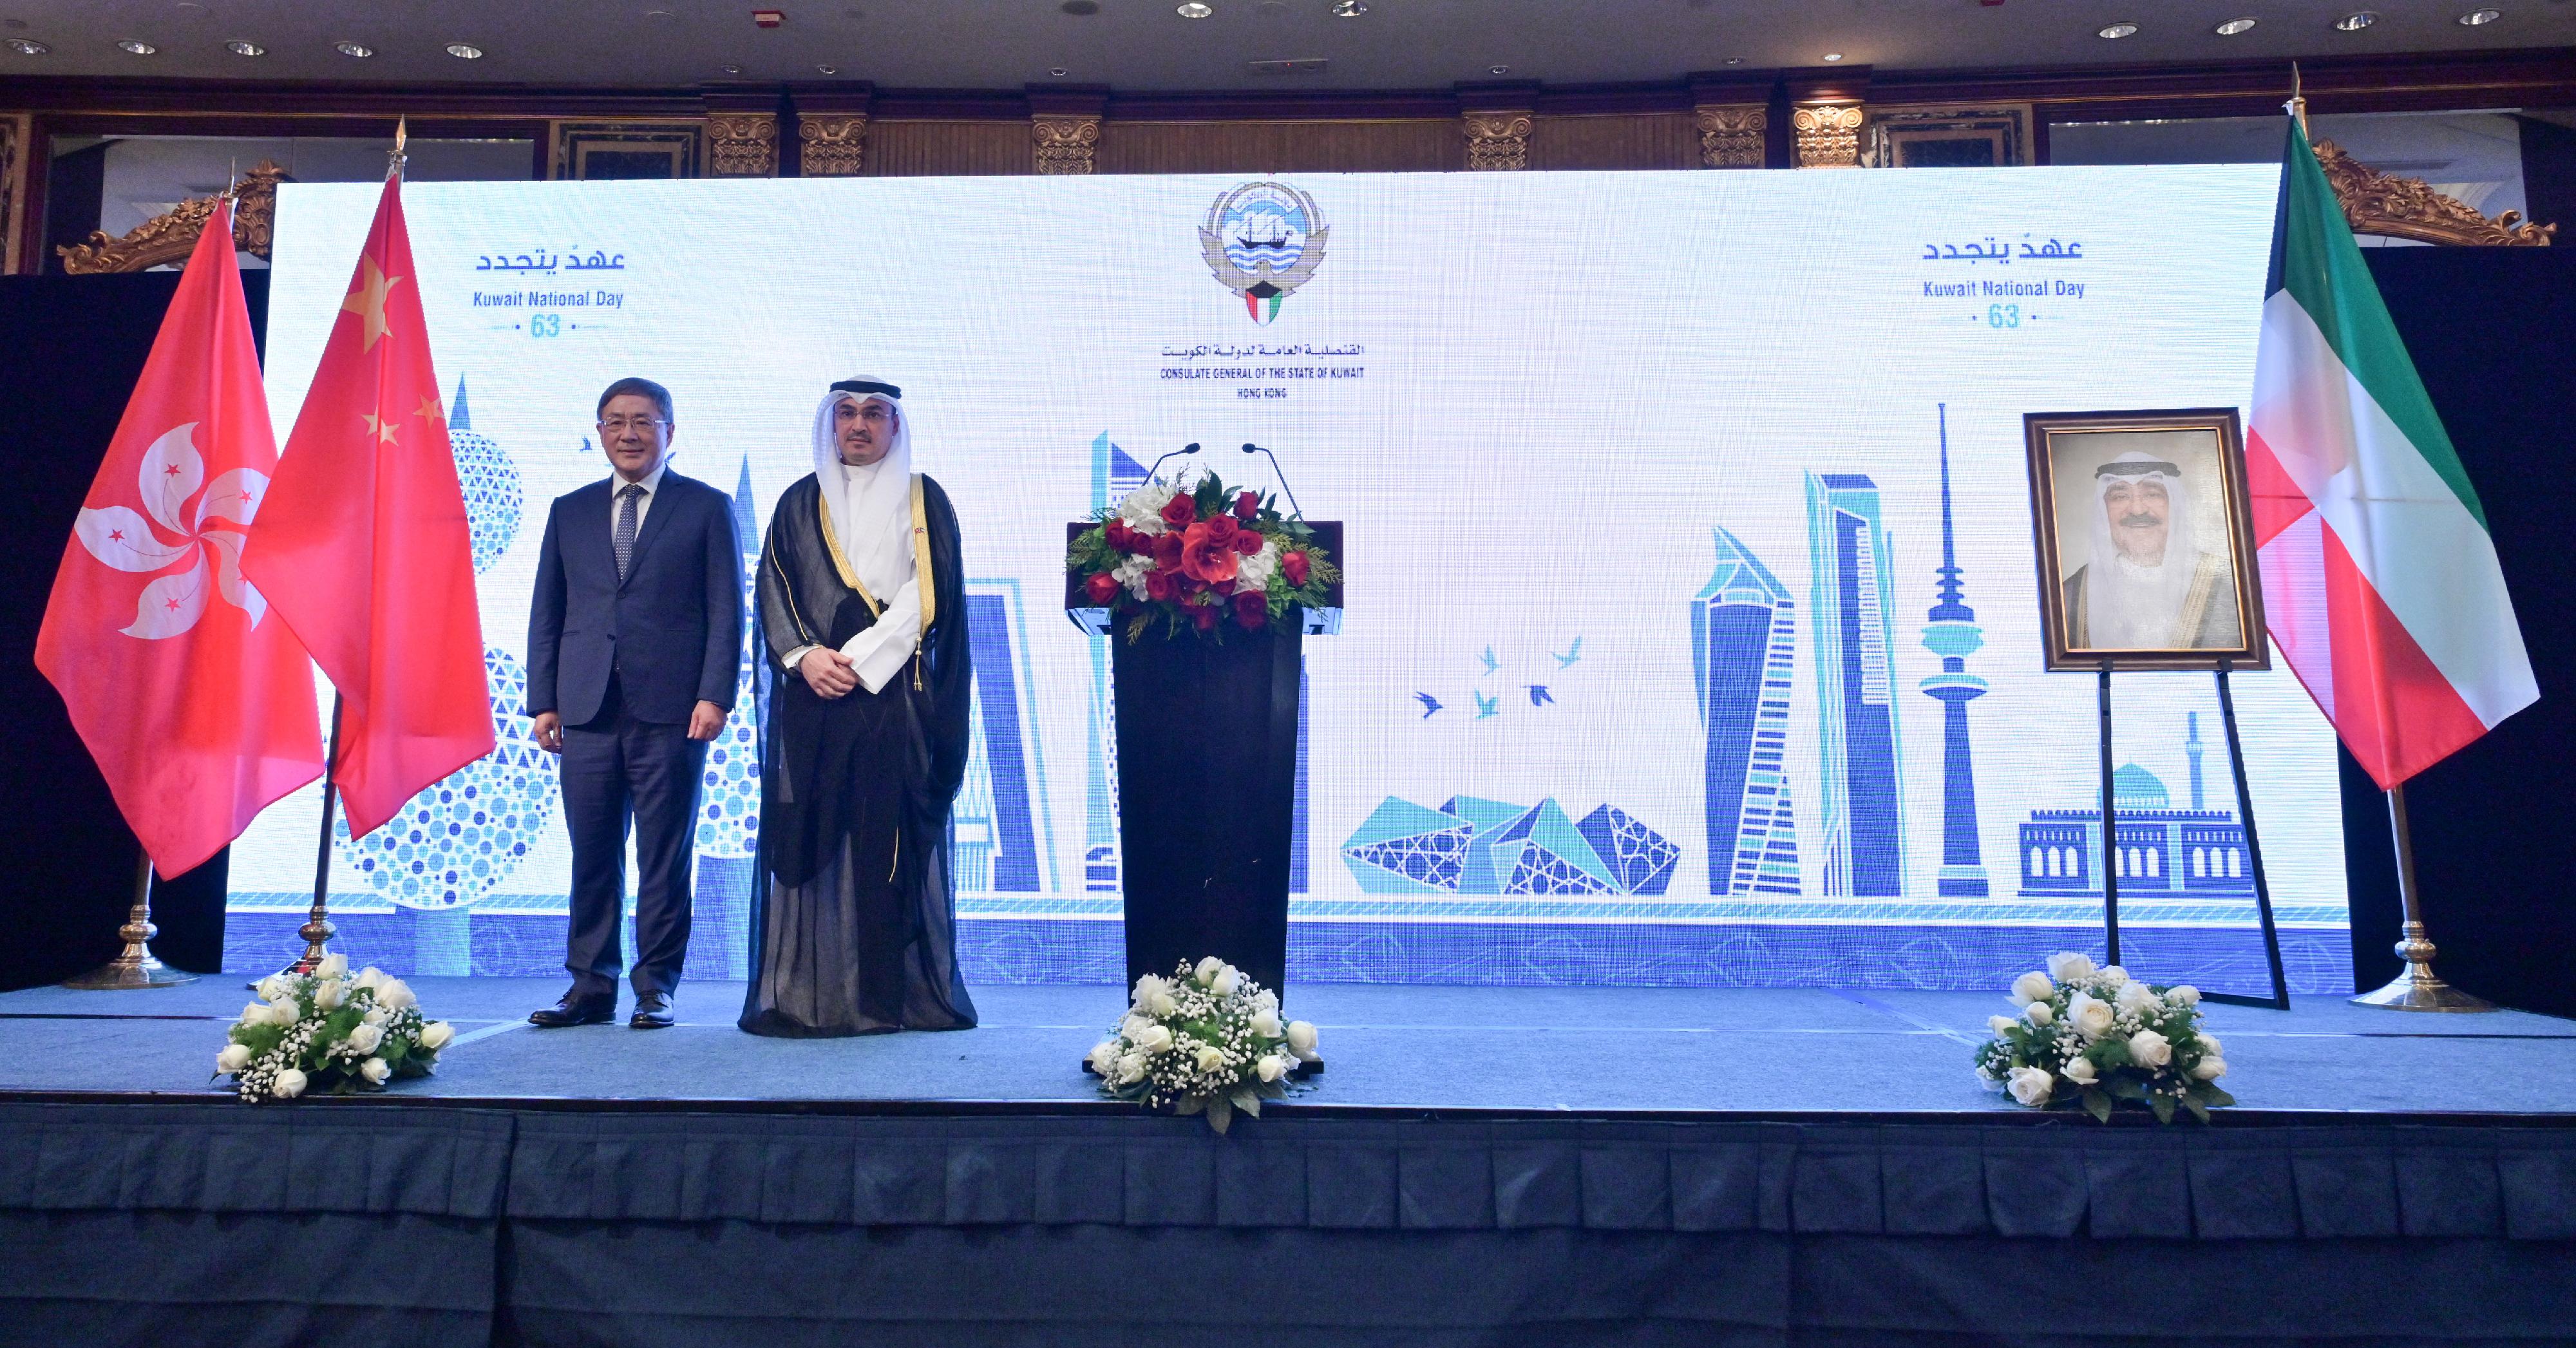 The Deputy Chief Secretary for Administration, Mr Cheuk Wing-hing (left), and the Consul General of the State of Kuwait in Hong Kong, Mr Naser S Al-Ghanim (right), pose for a photo at the Kuwait National Day Reception this evening (February 22).